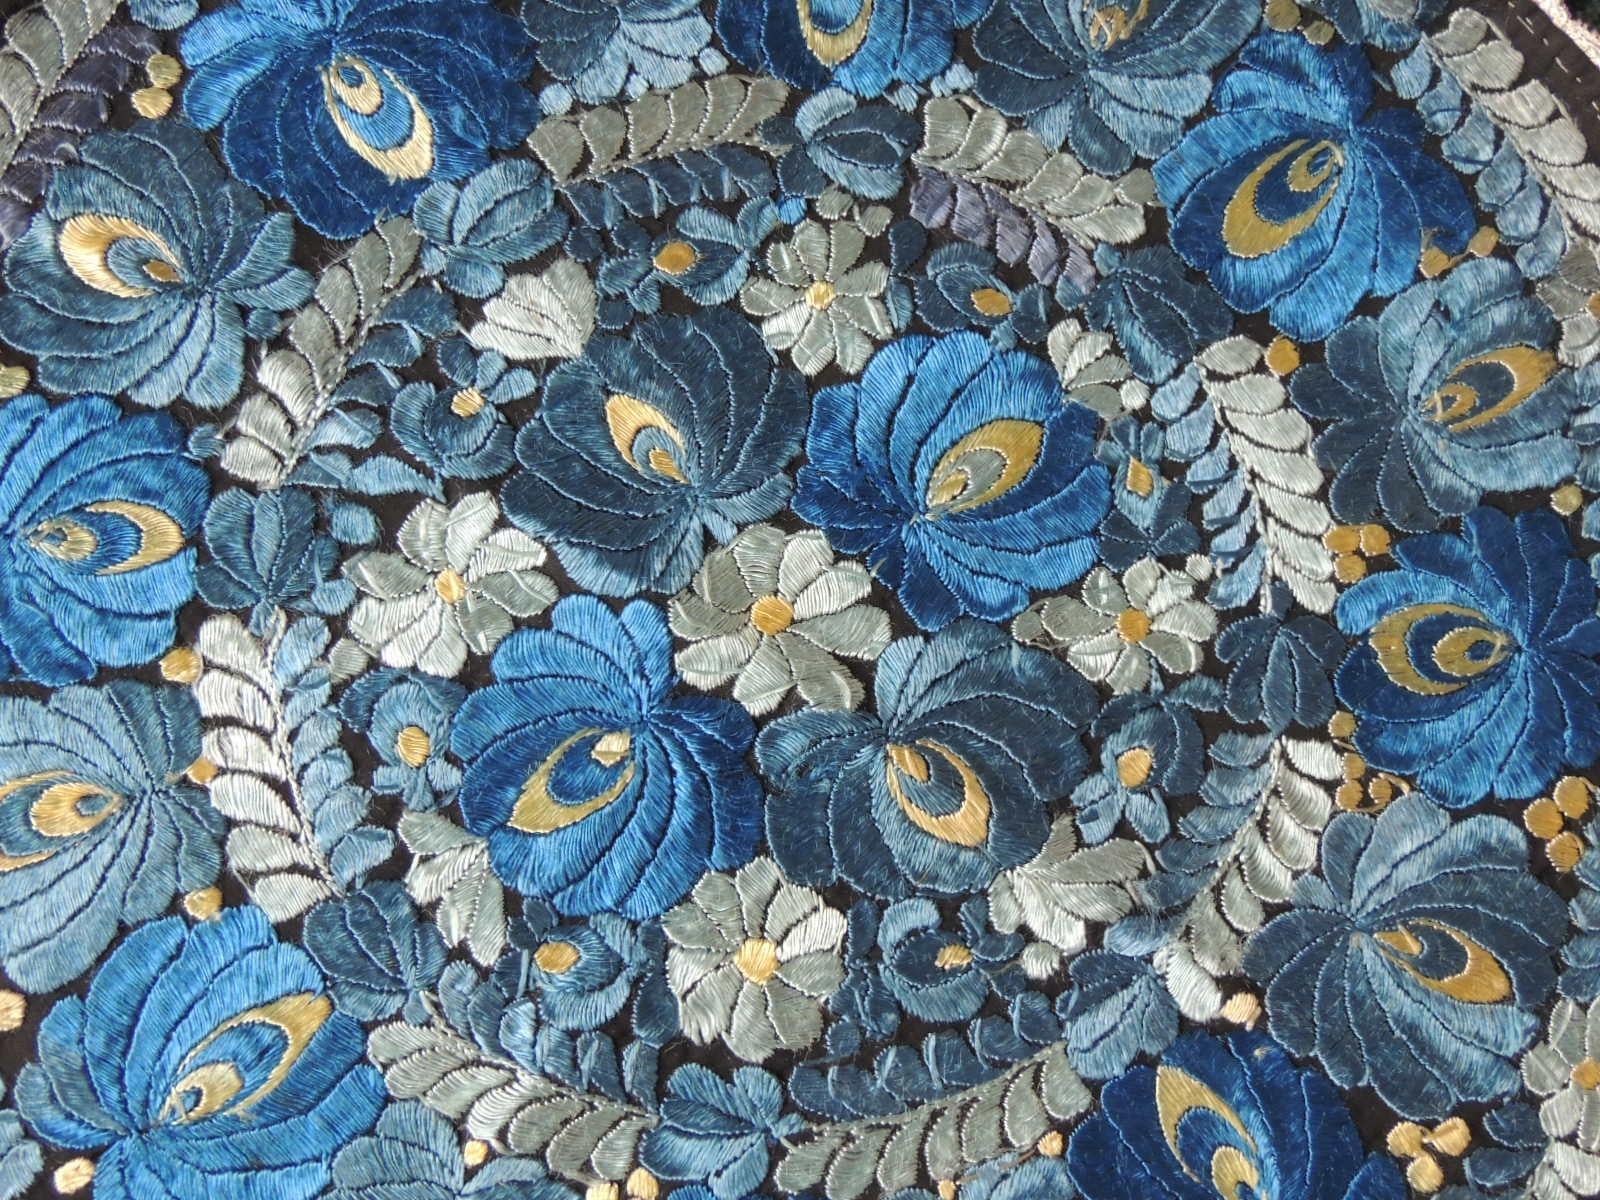 Vintage round blue and black silk embroidered table topper.
Floral and vines pattern in various shades of blue with a braided
woven trim all around.
The underside is brighter.
Ideal for a table or a decorative pillow.
Size: 21